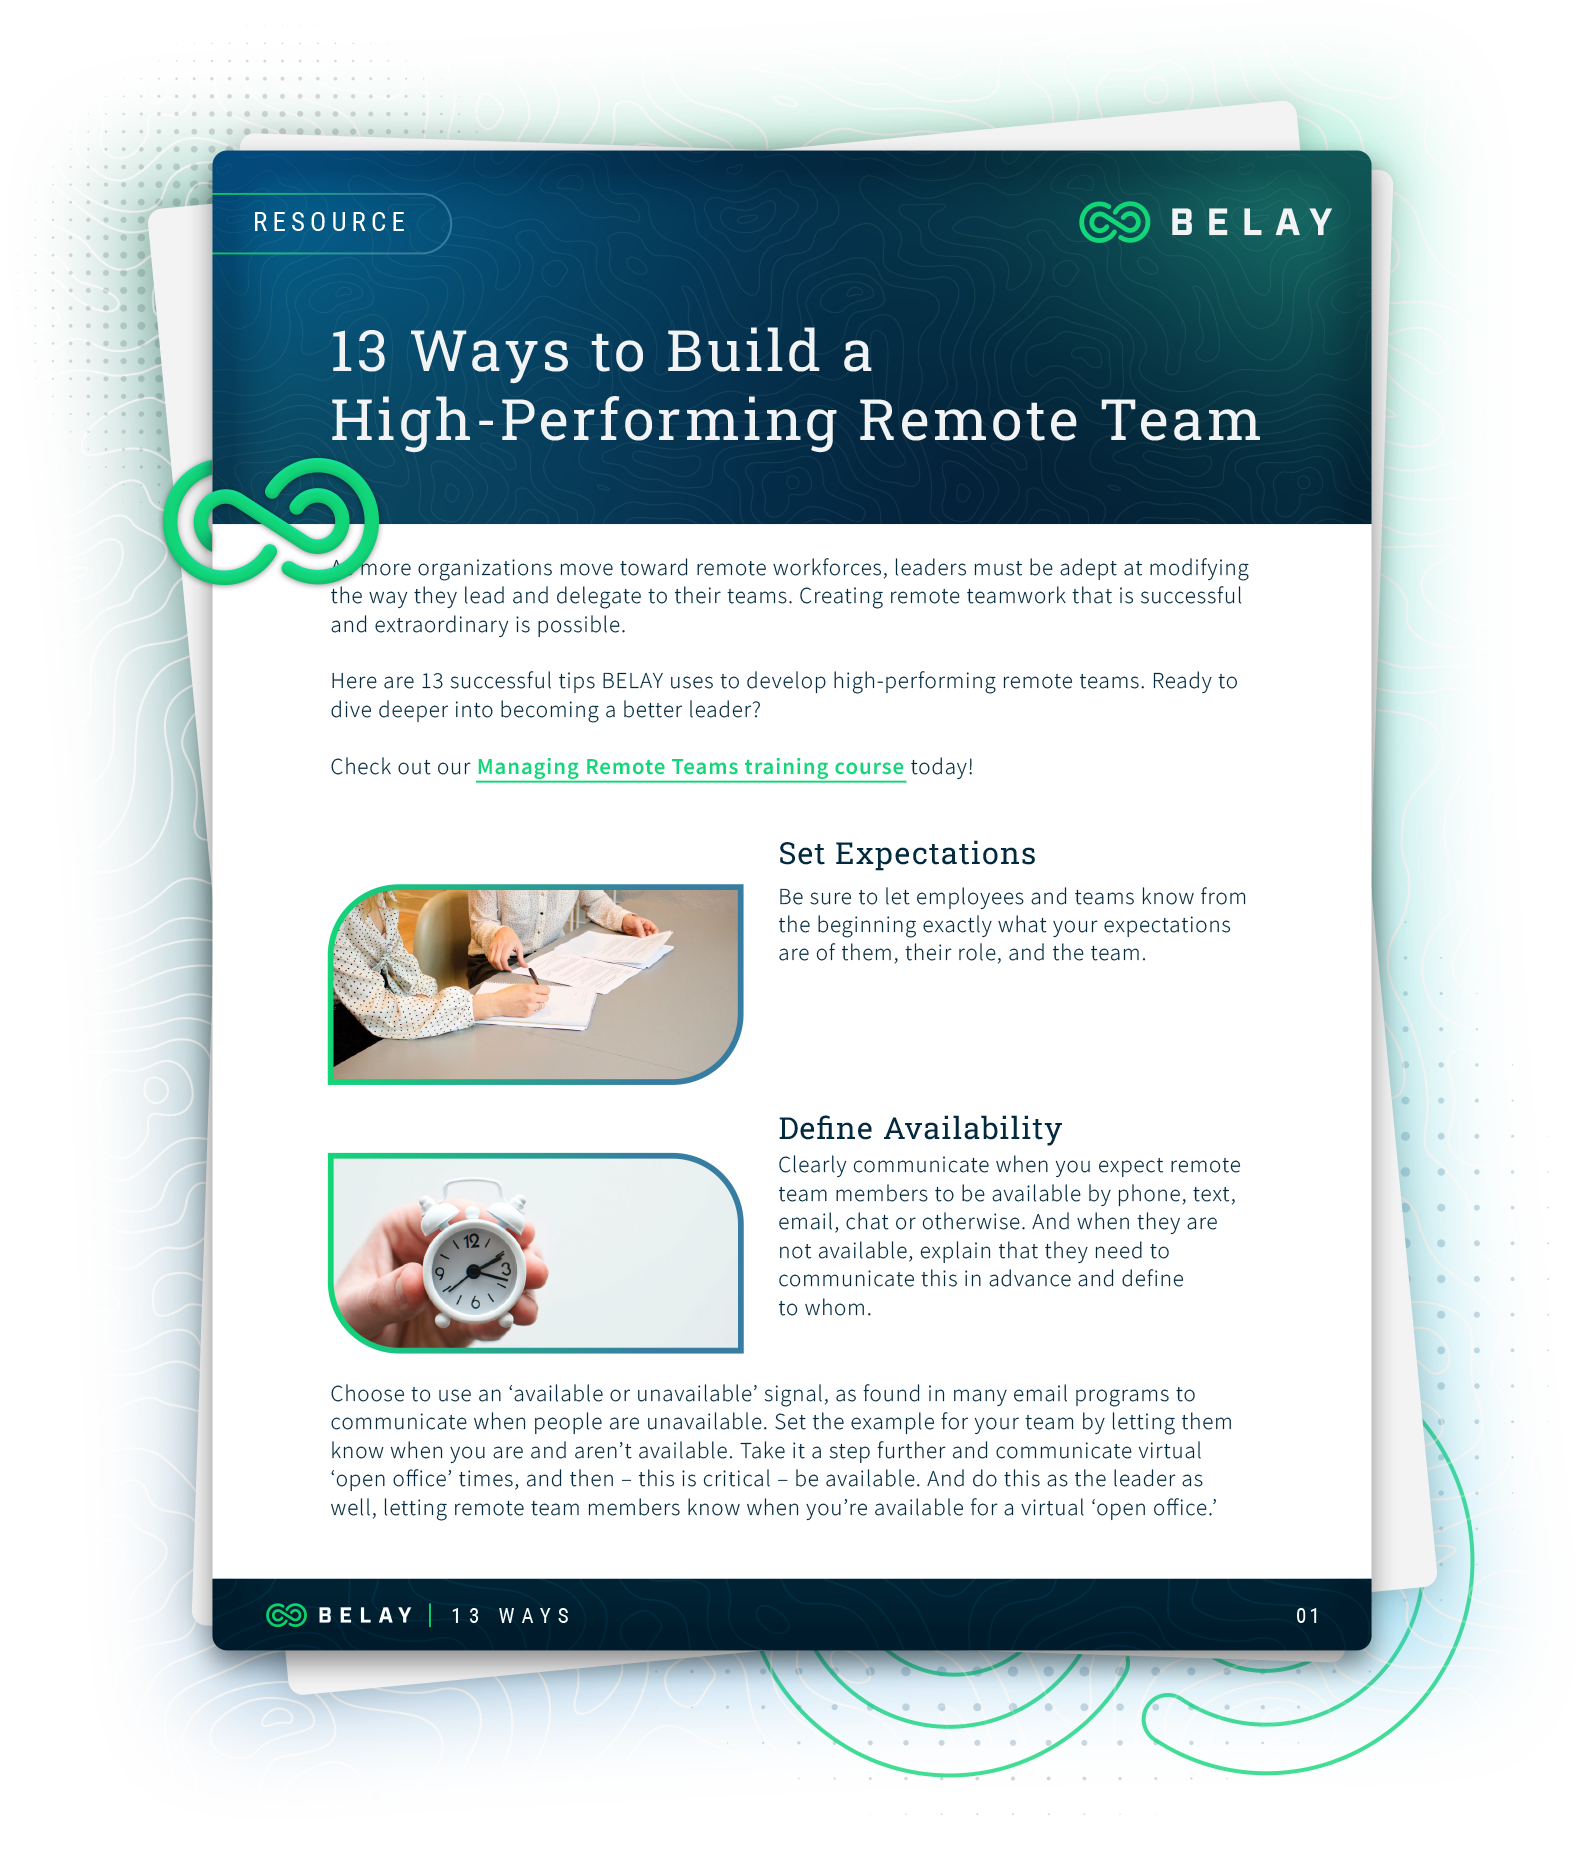 13 Ways to Build a High-Performing Remote Team